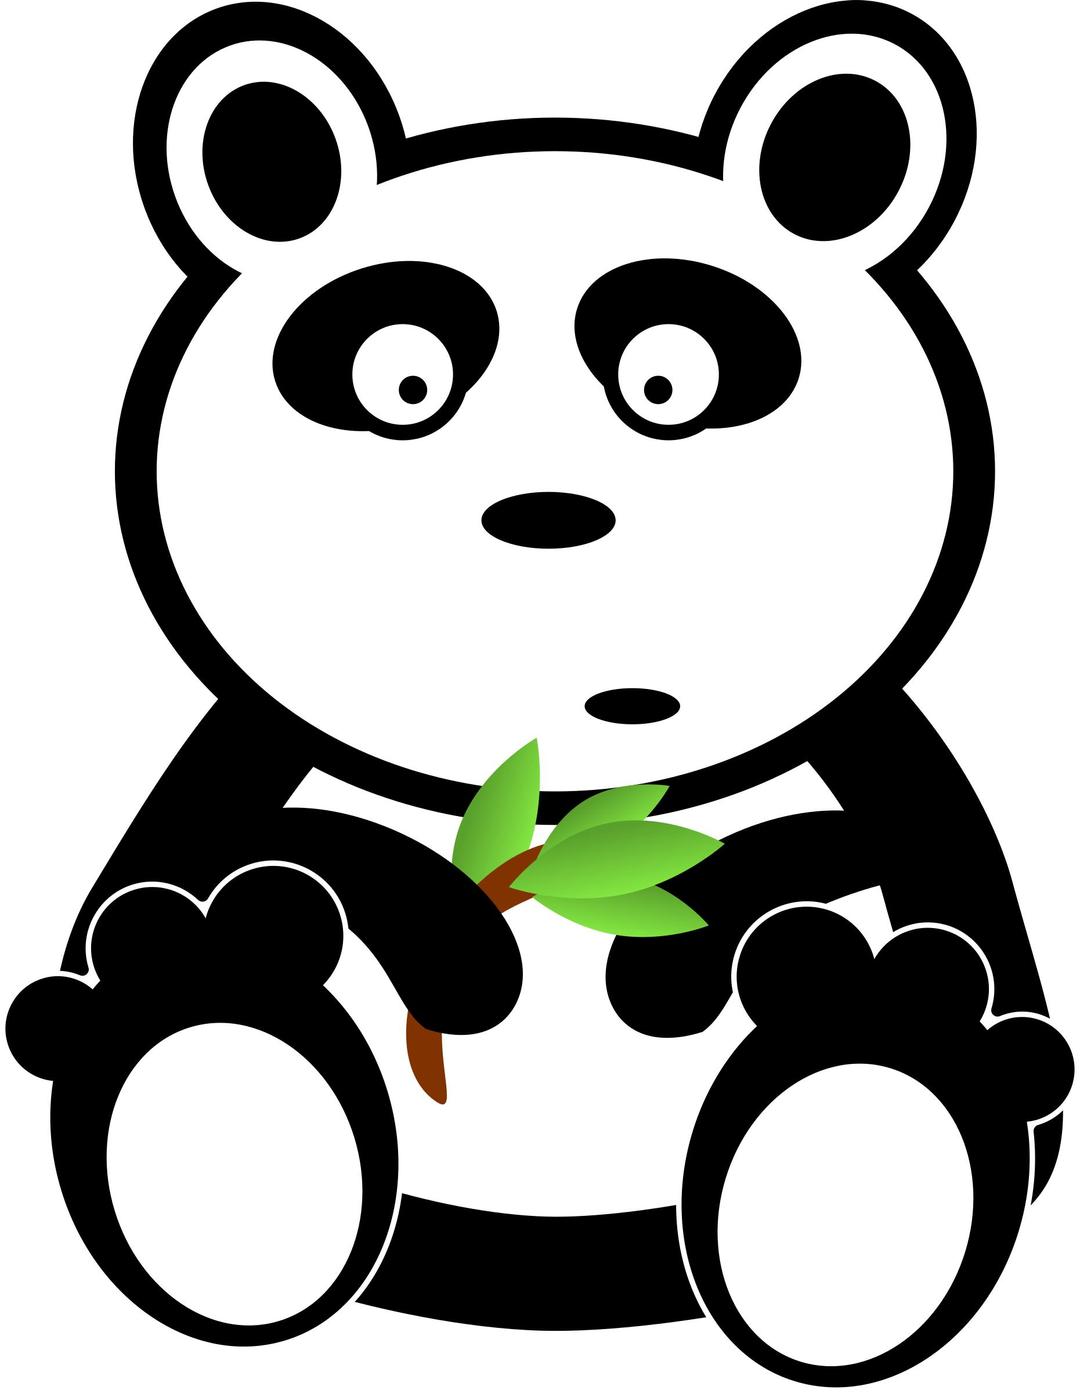 Panda with bamboo leaves png transparent